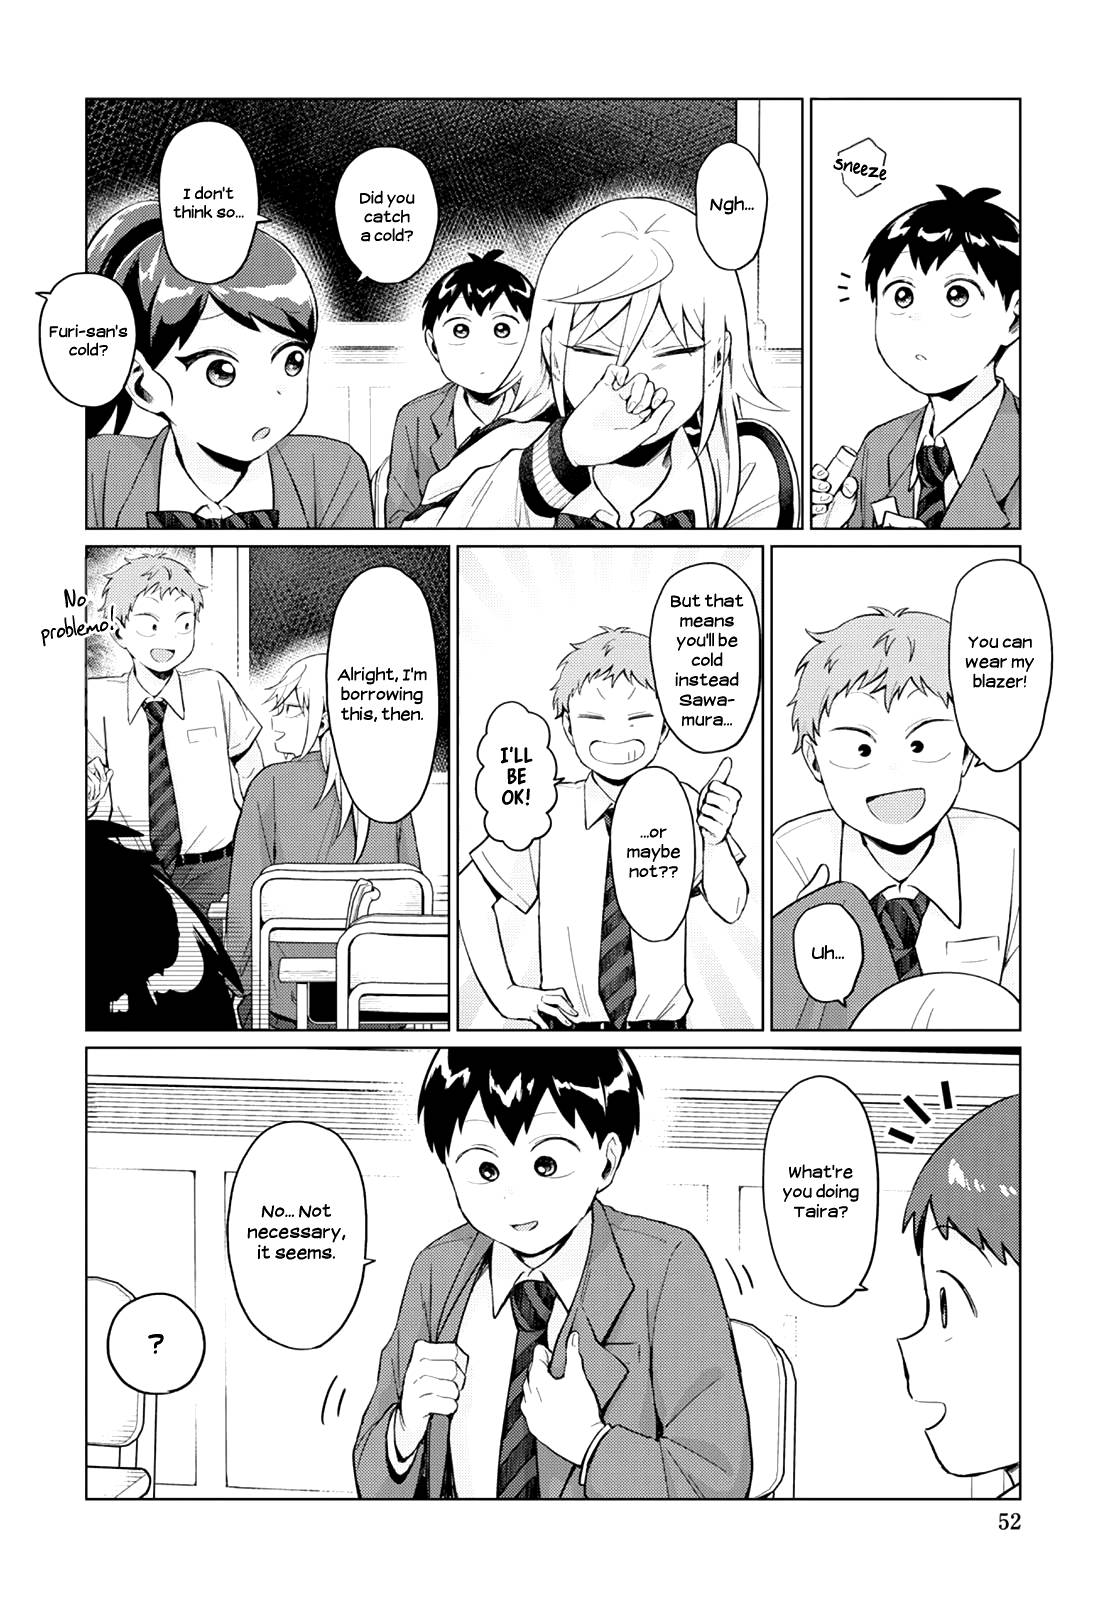 No Matter What You Say, Furi-san is Scary. - chapter 25 - #2